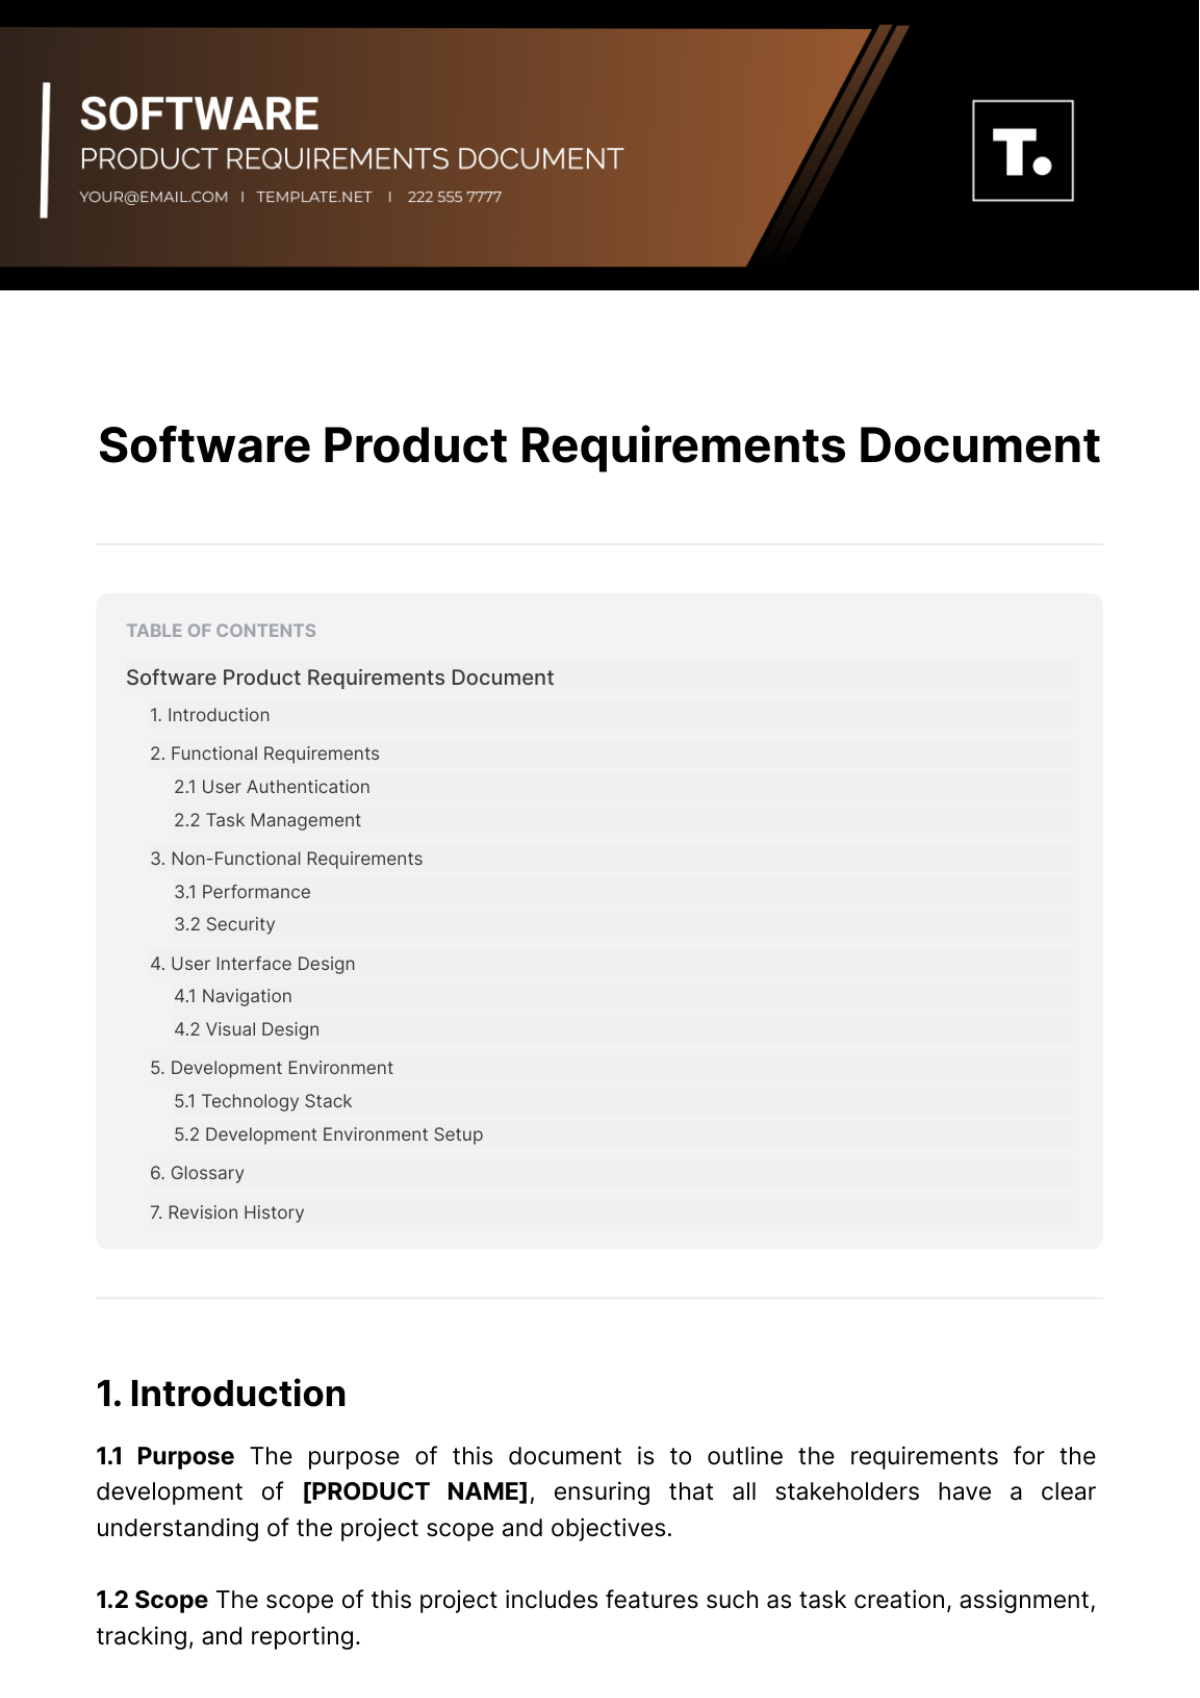 Software Product Requirements Document Template